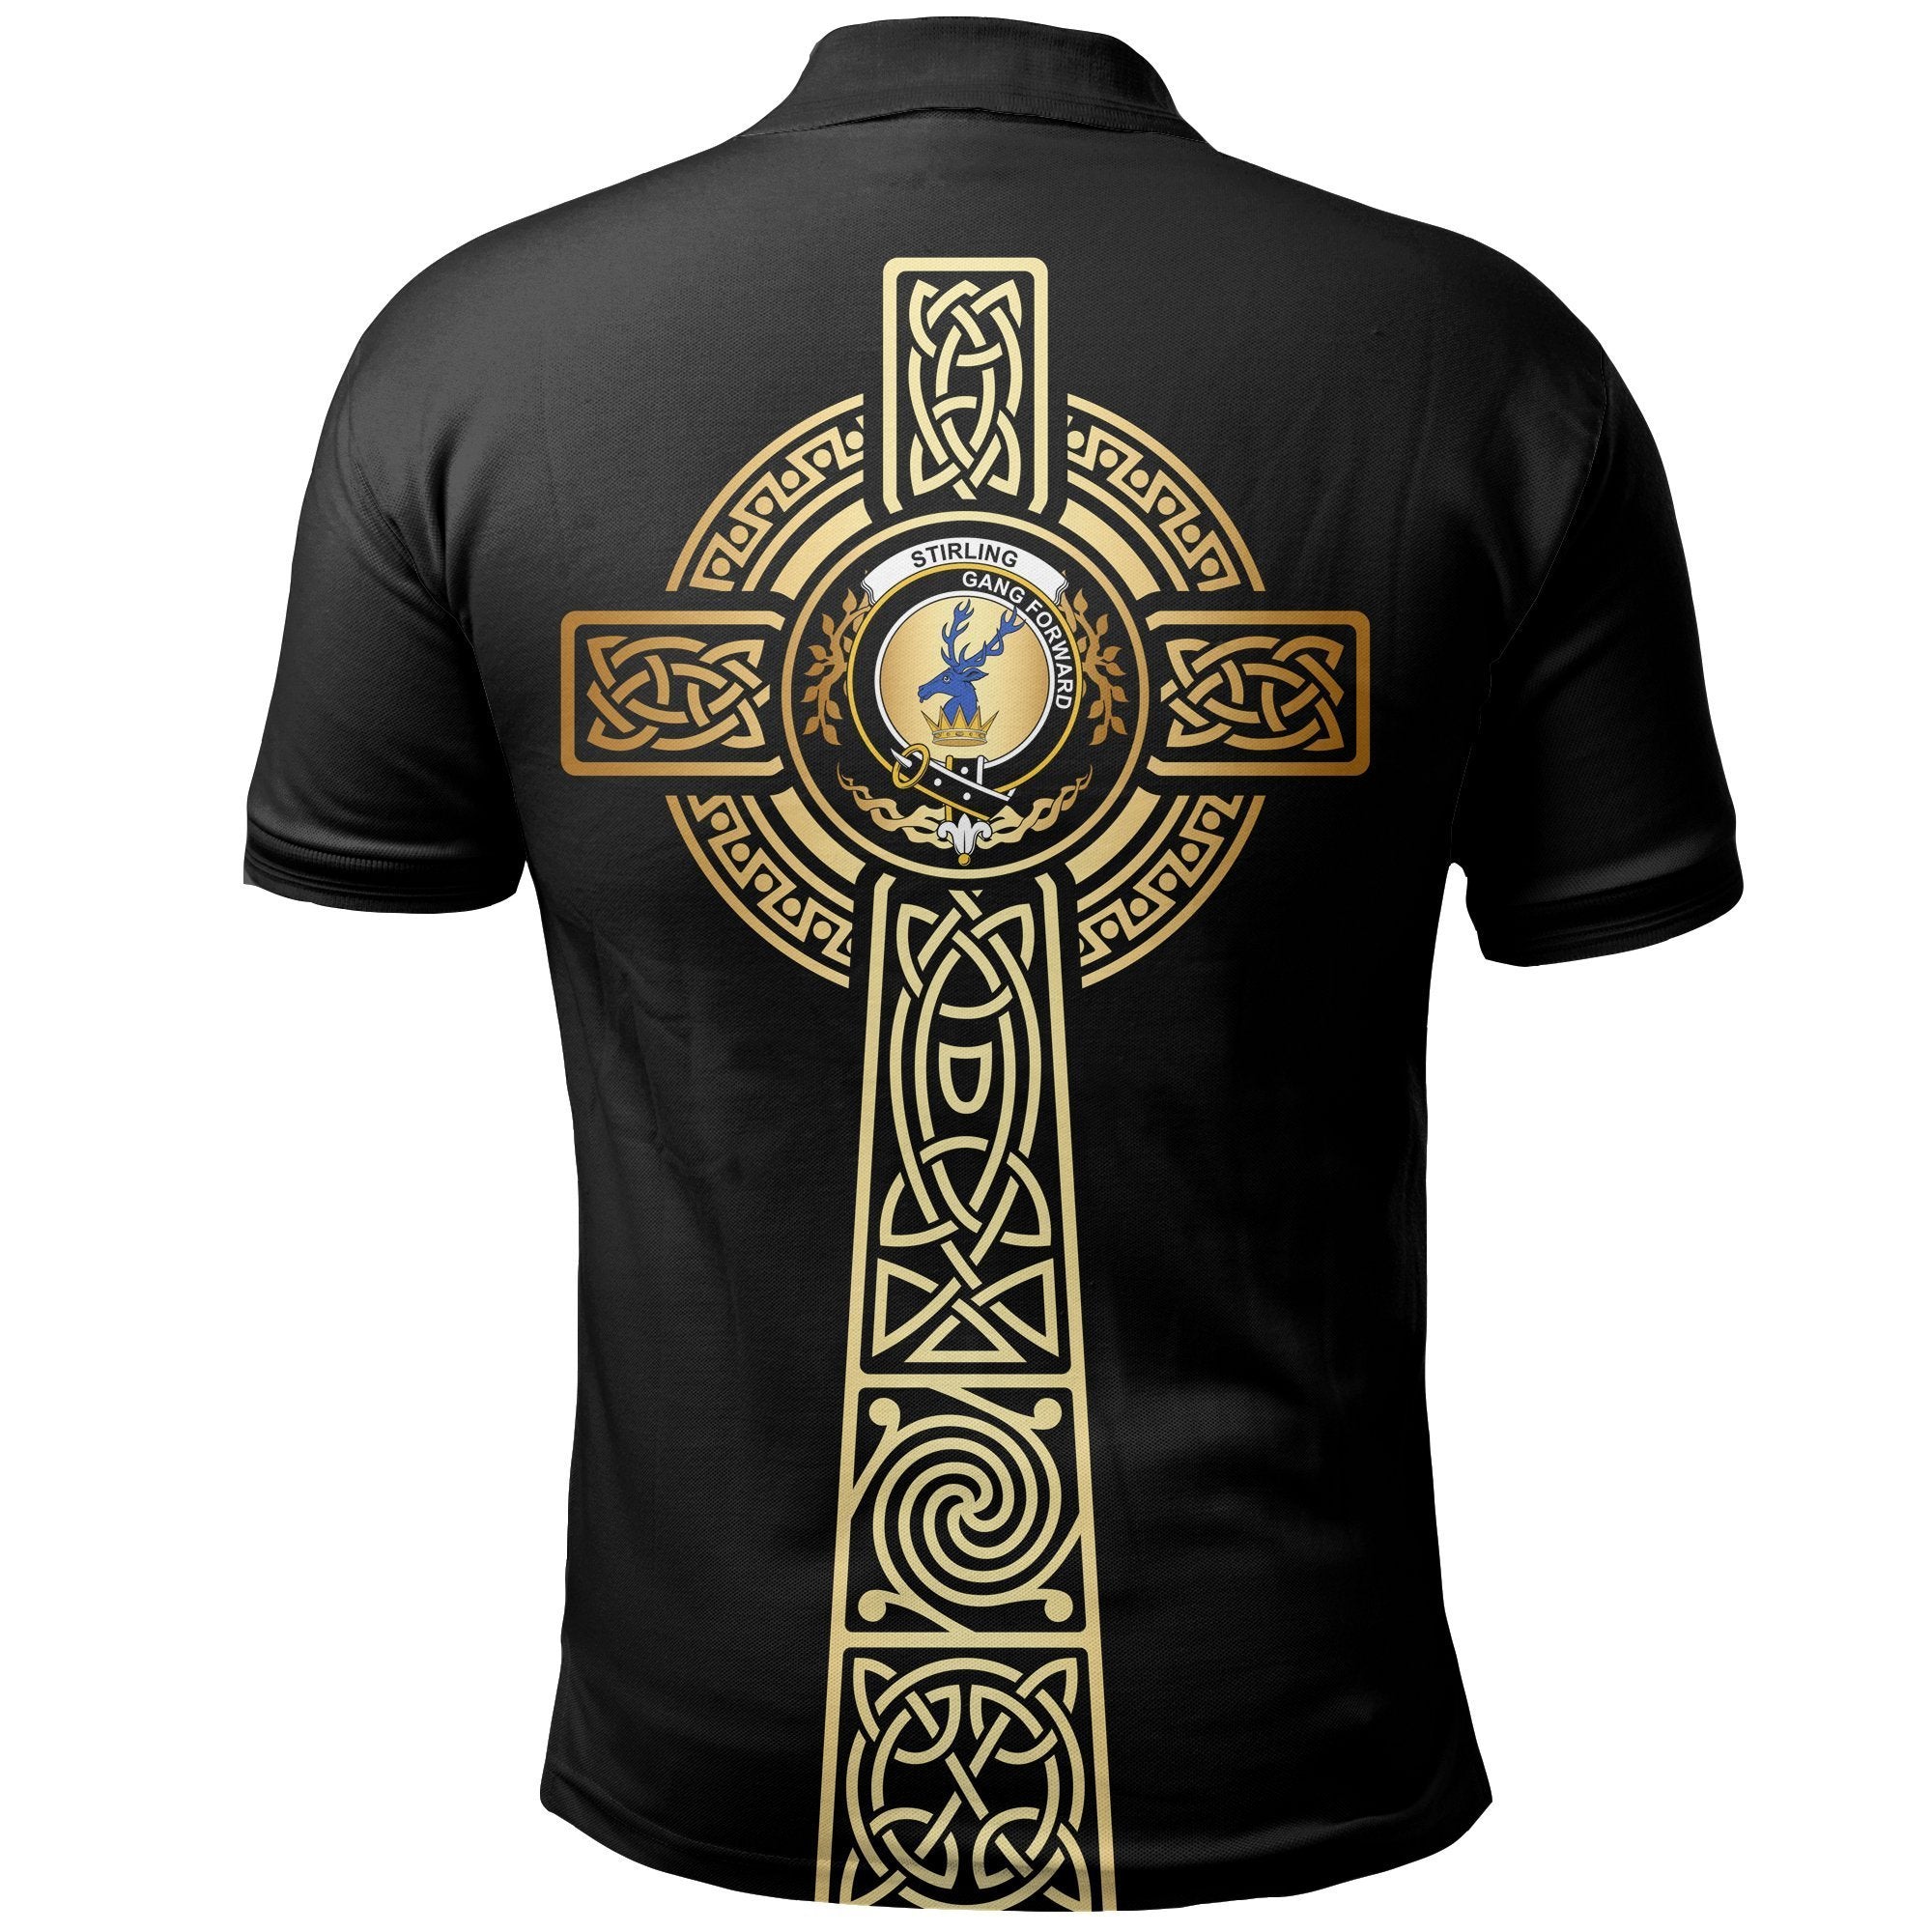 Stirling (of Cadder-Present Chief) Clan Unisex Polo Shirt - Celtic Tree Of Life